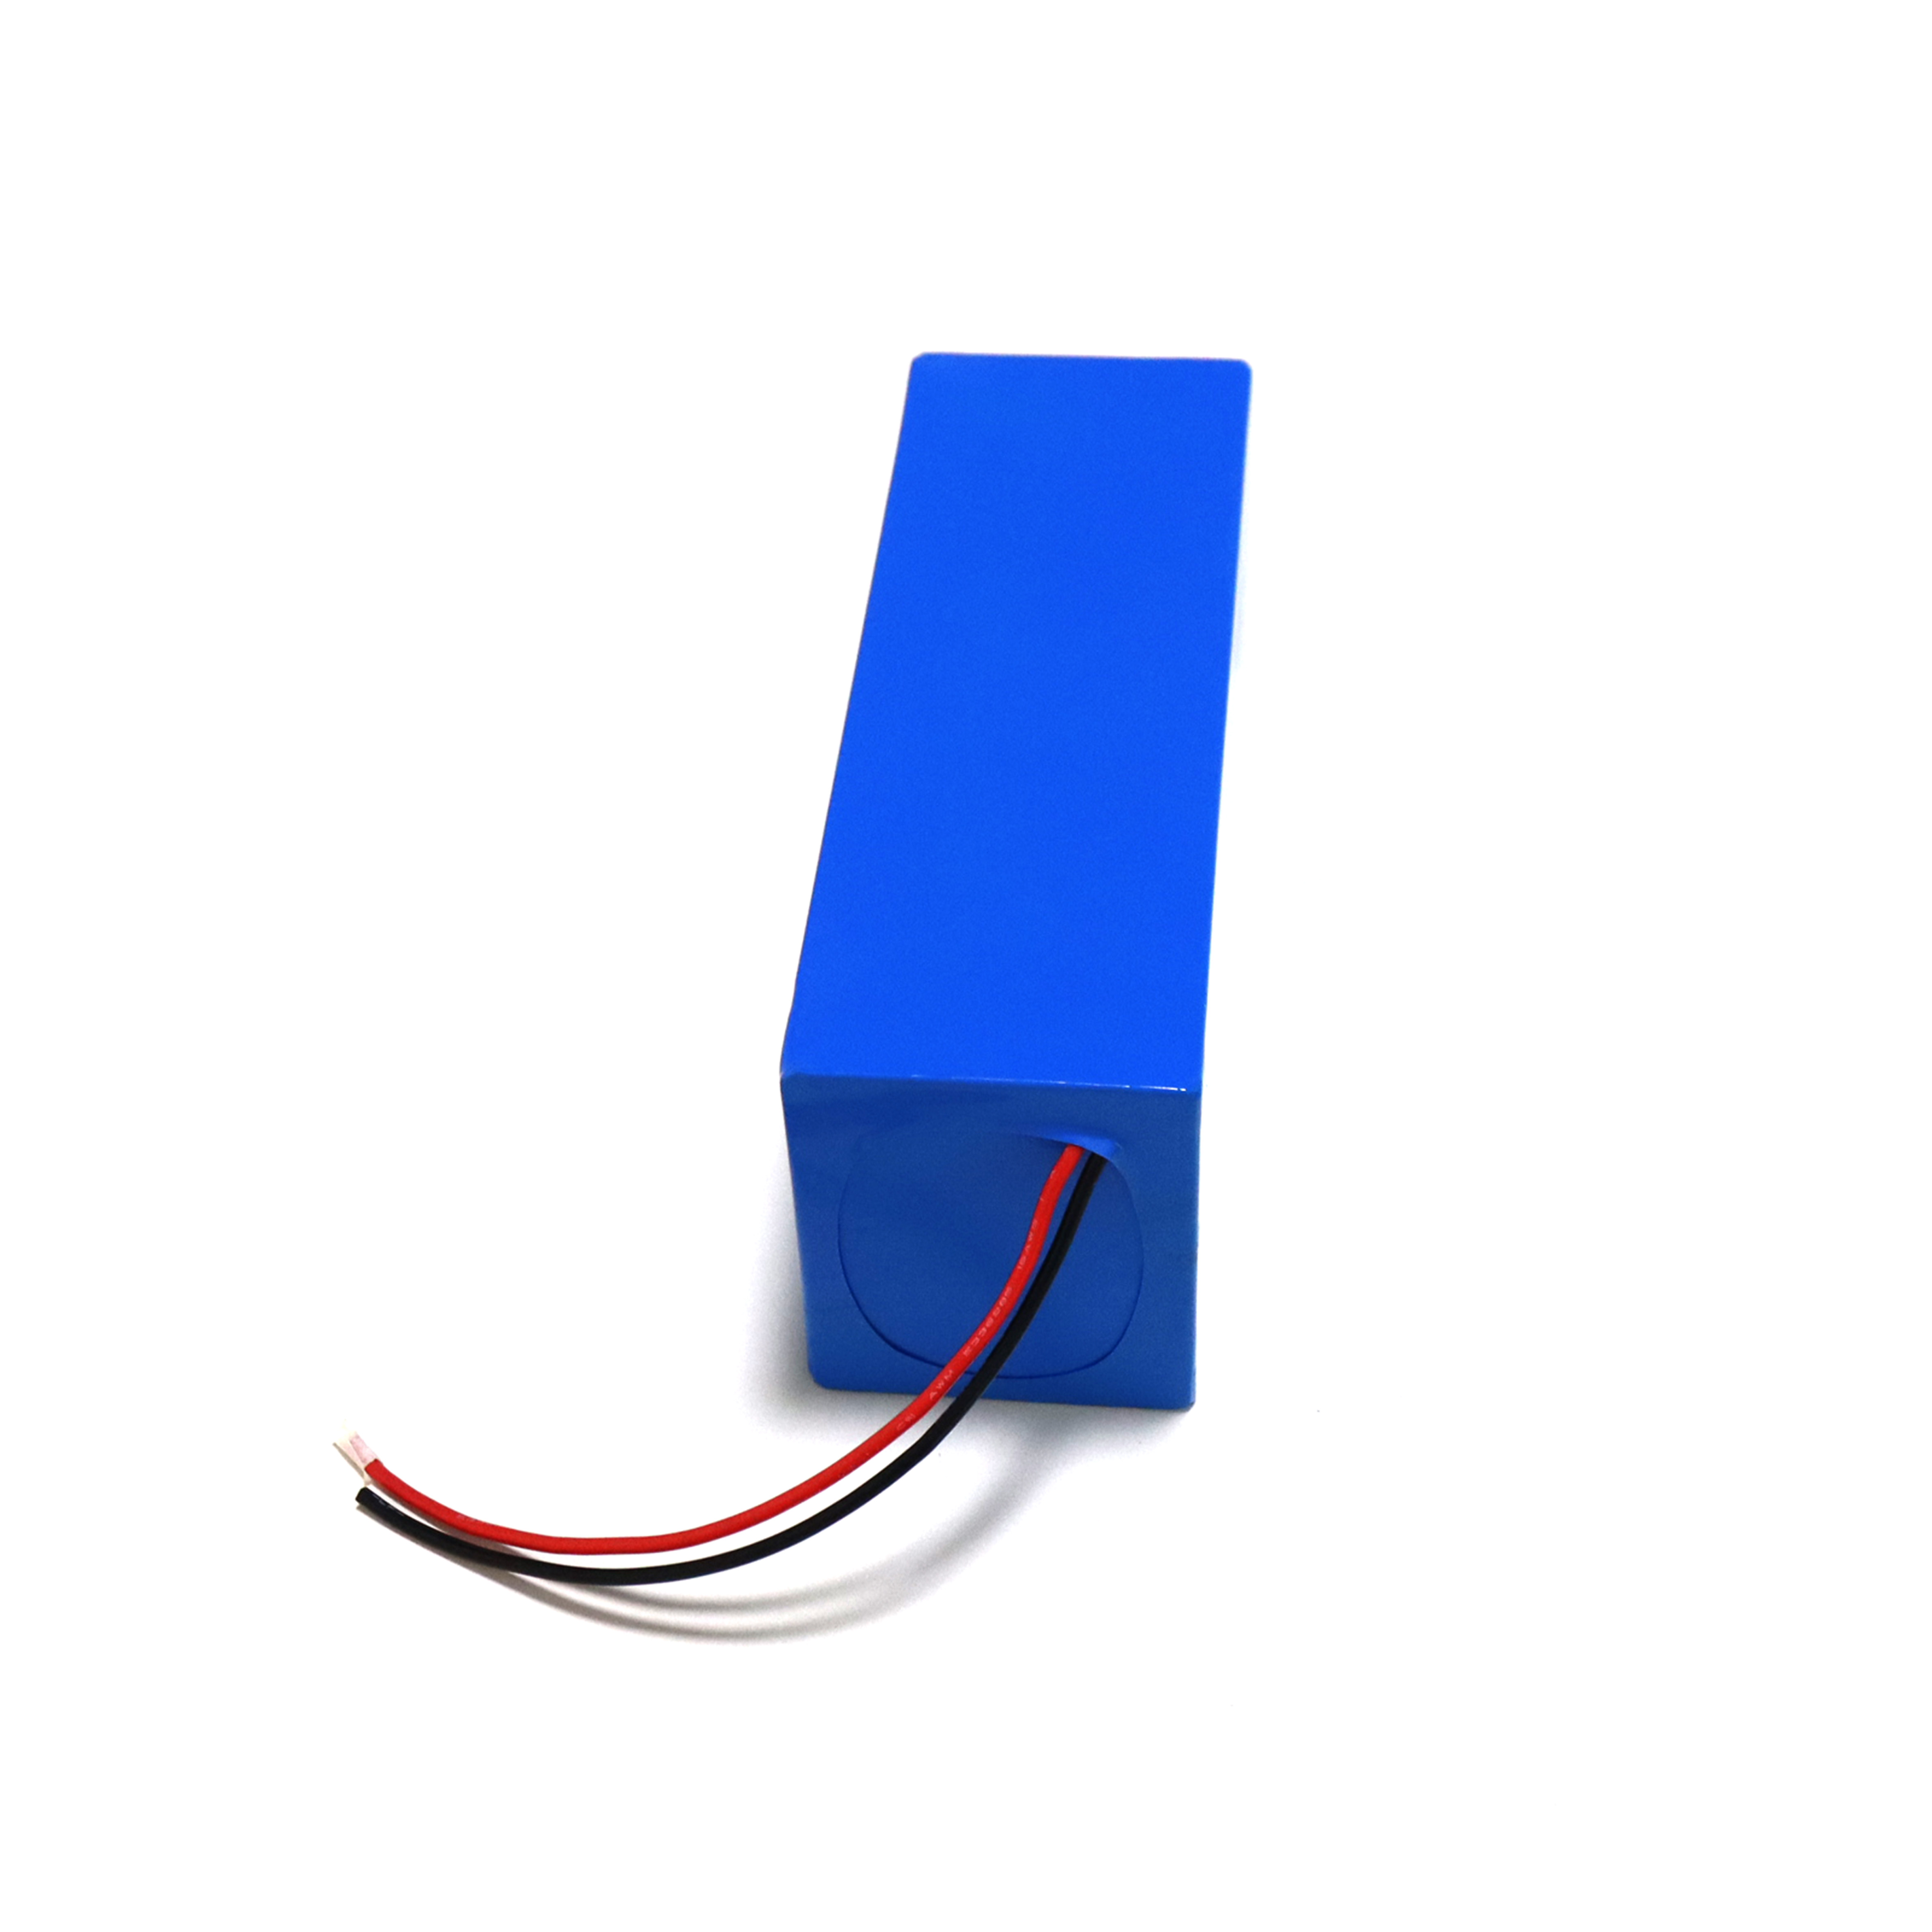 18650 52v LiFePO4 battery cell for electric bike